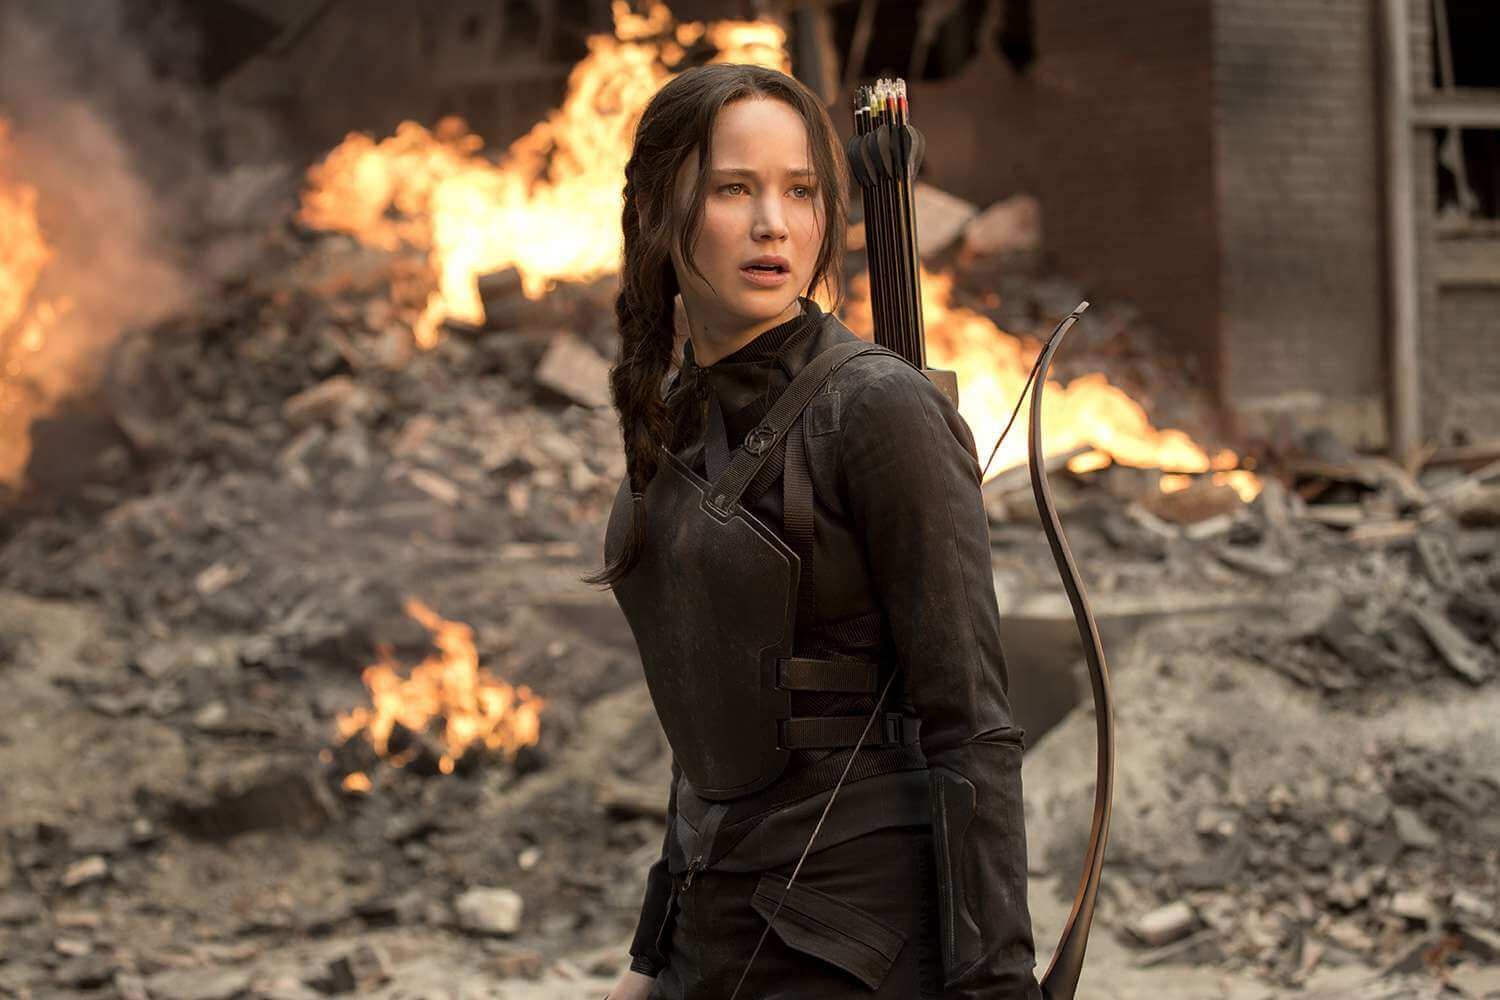 Jennifer Lawrence in a still from The Hunger Games